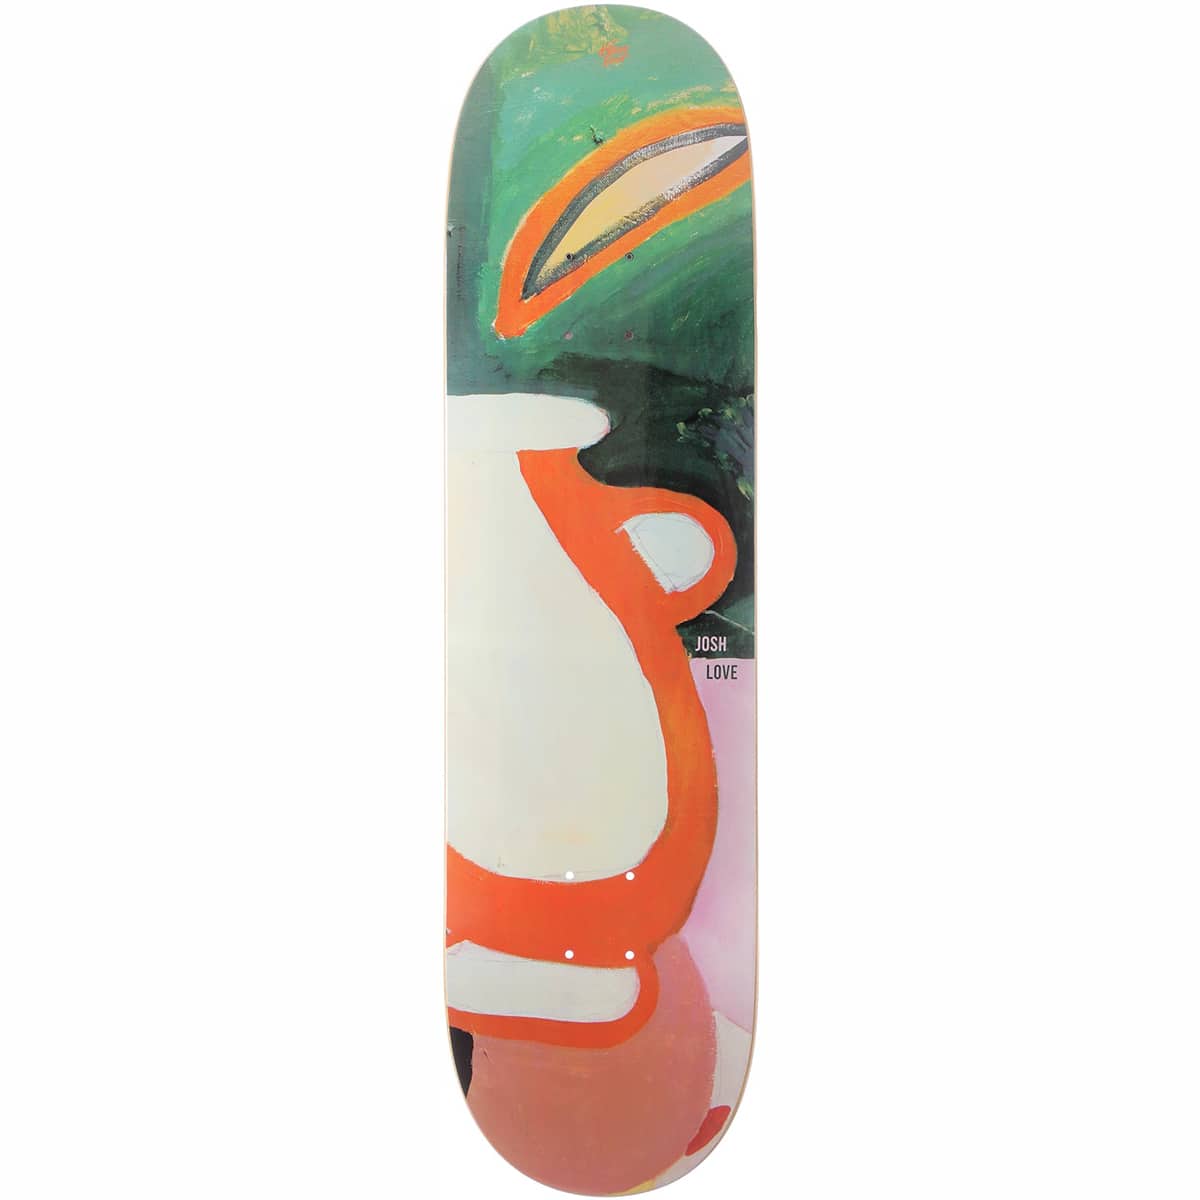 The Killing Floor Fitch Love 8 5 deck